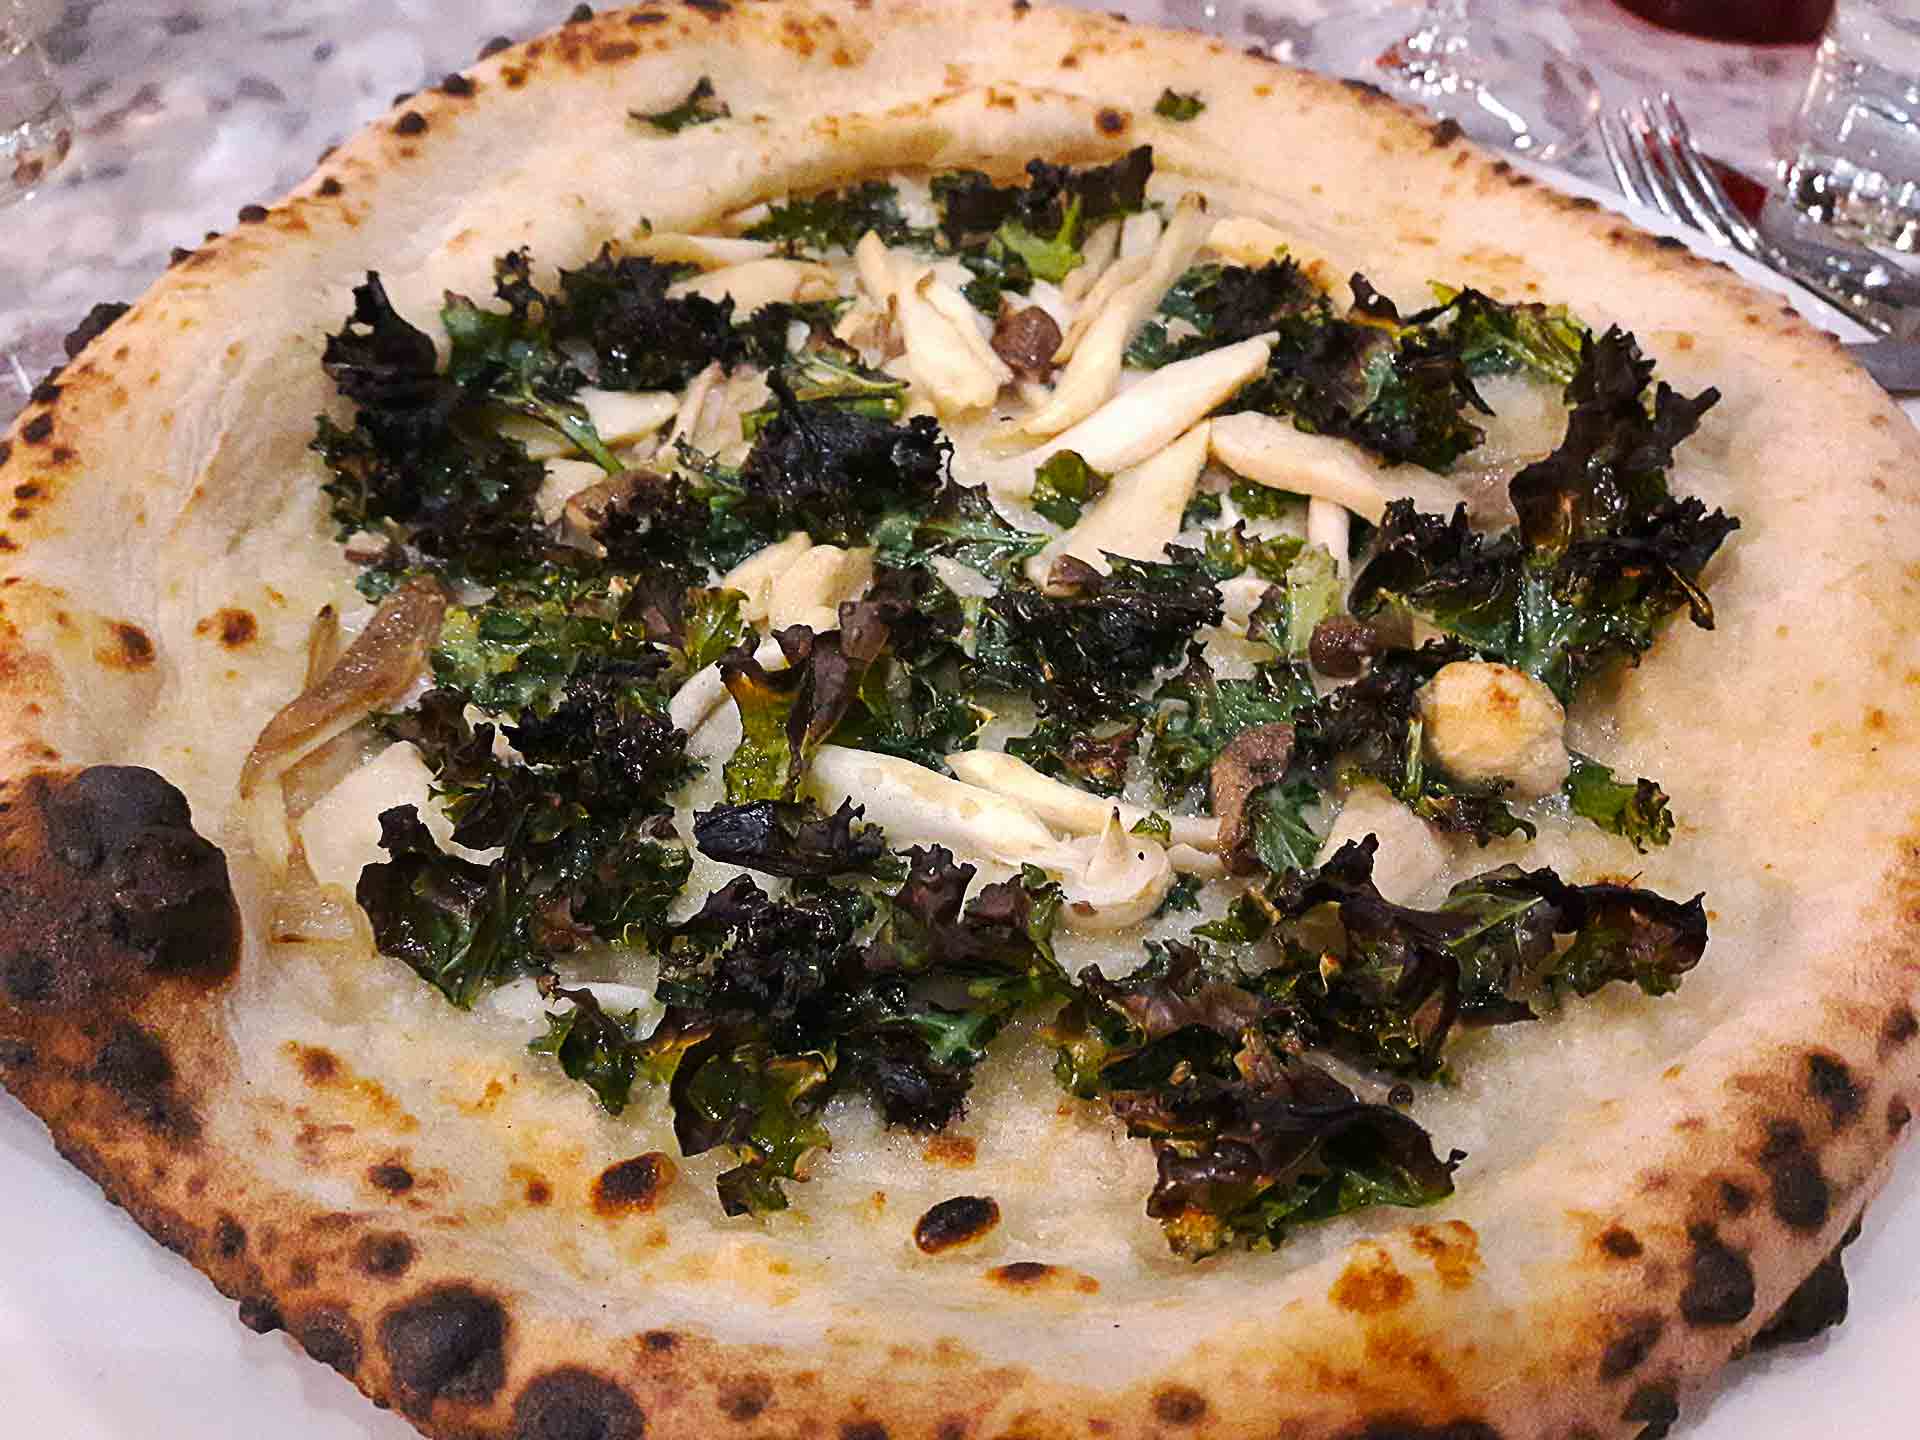 Funghi Pizza that's Fun to Eat Hidden Gems Vancouver